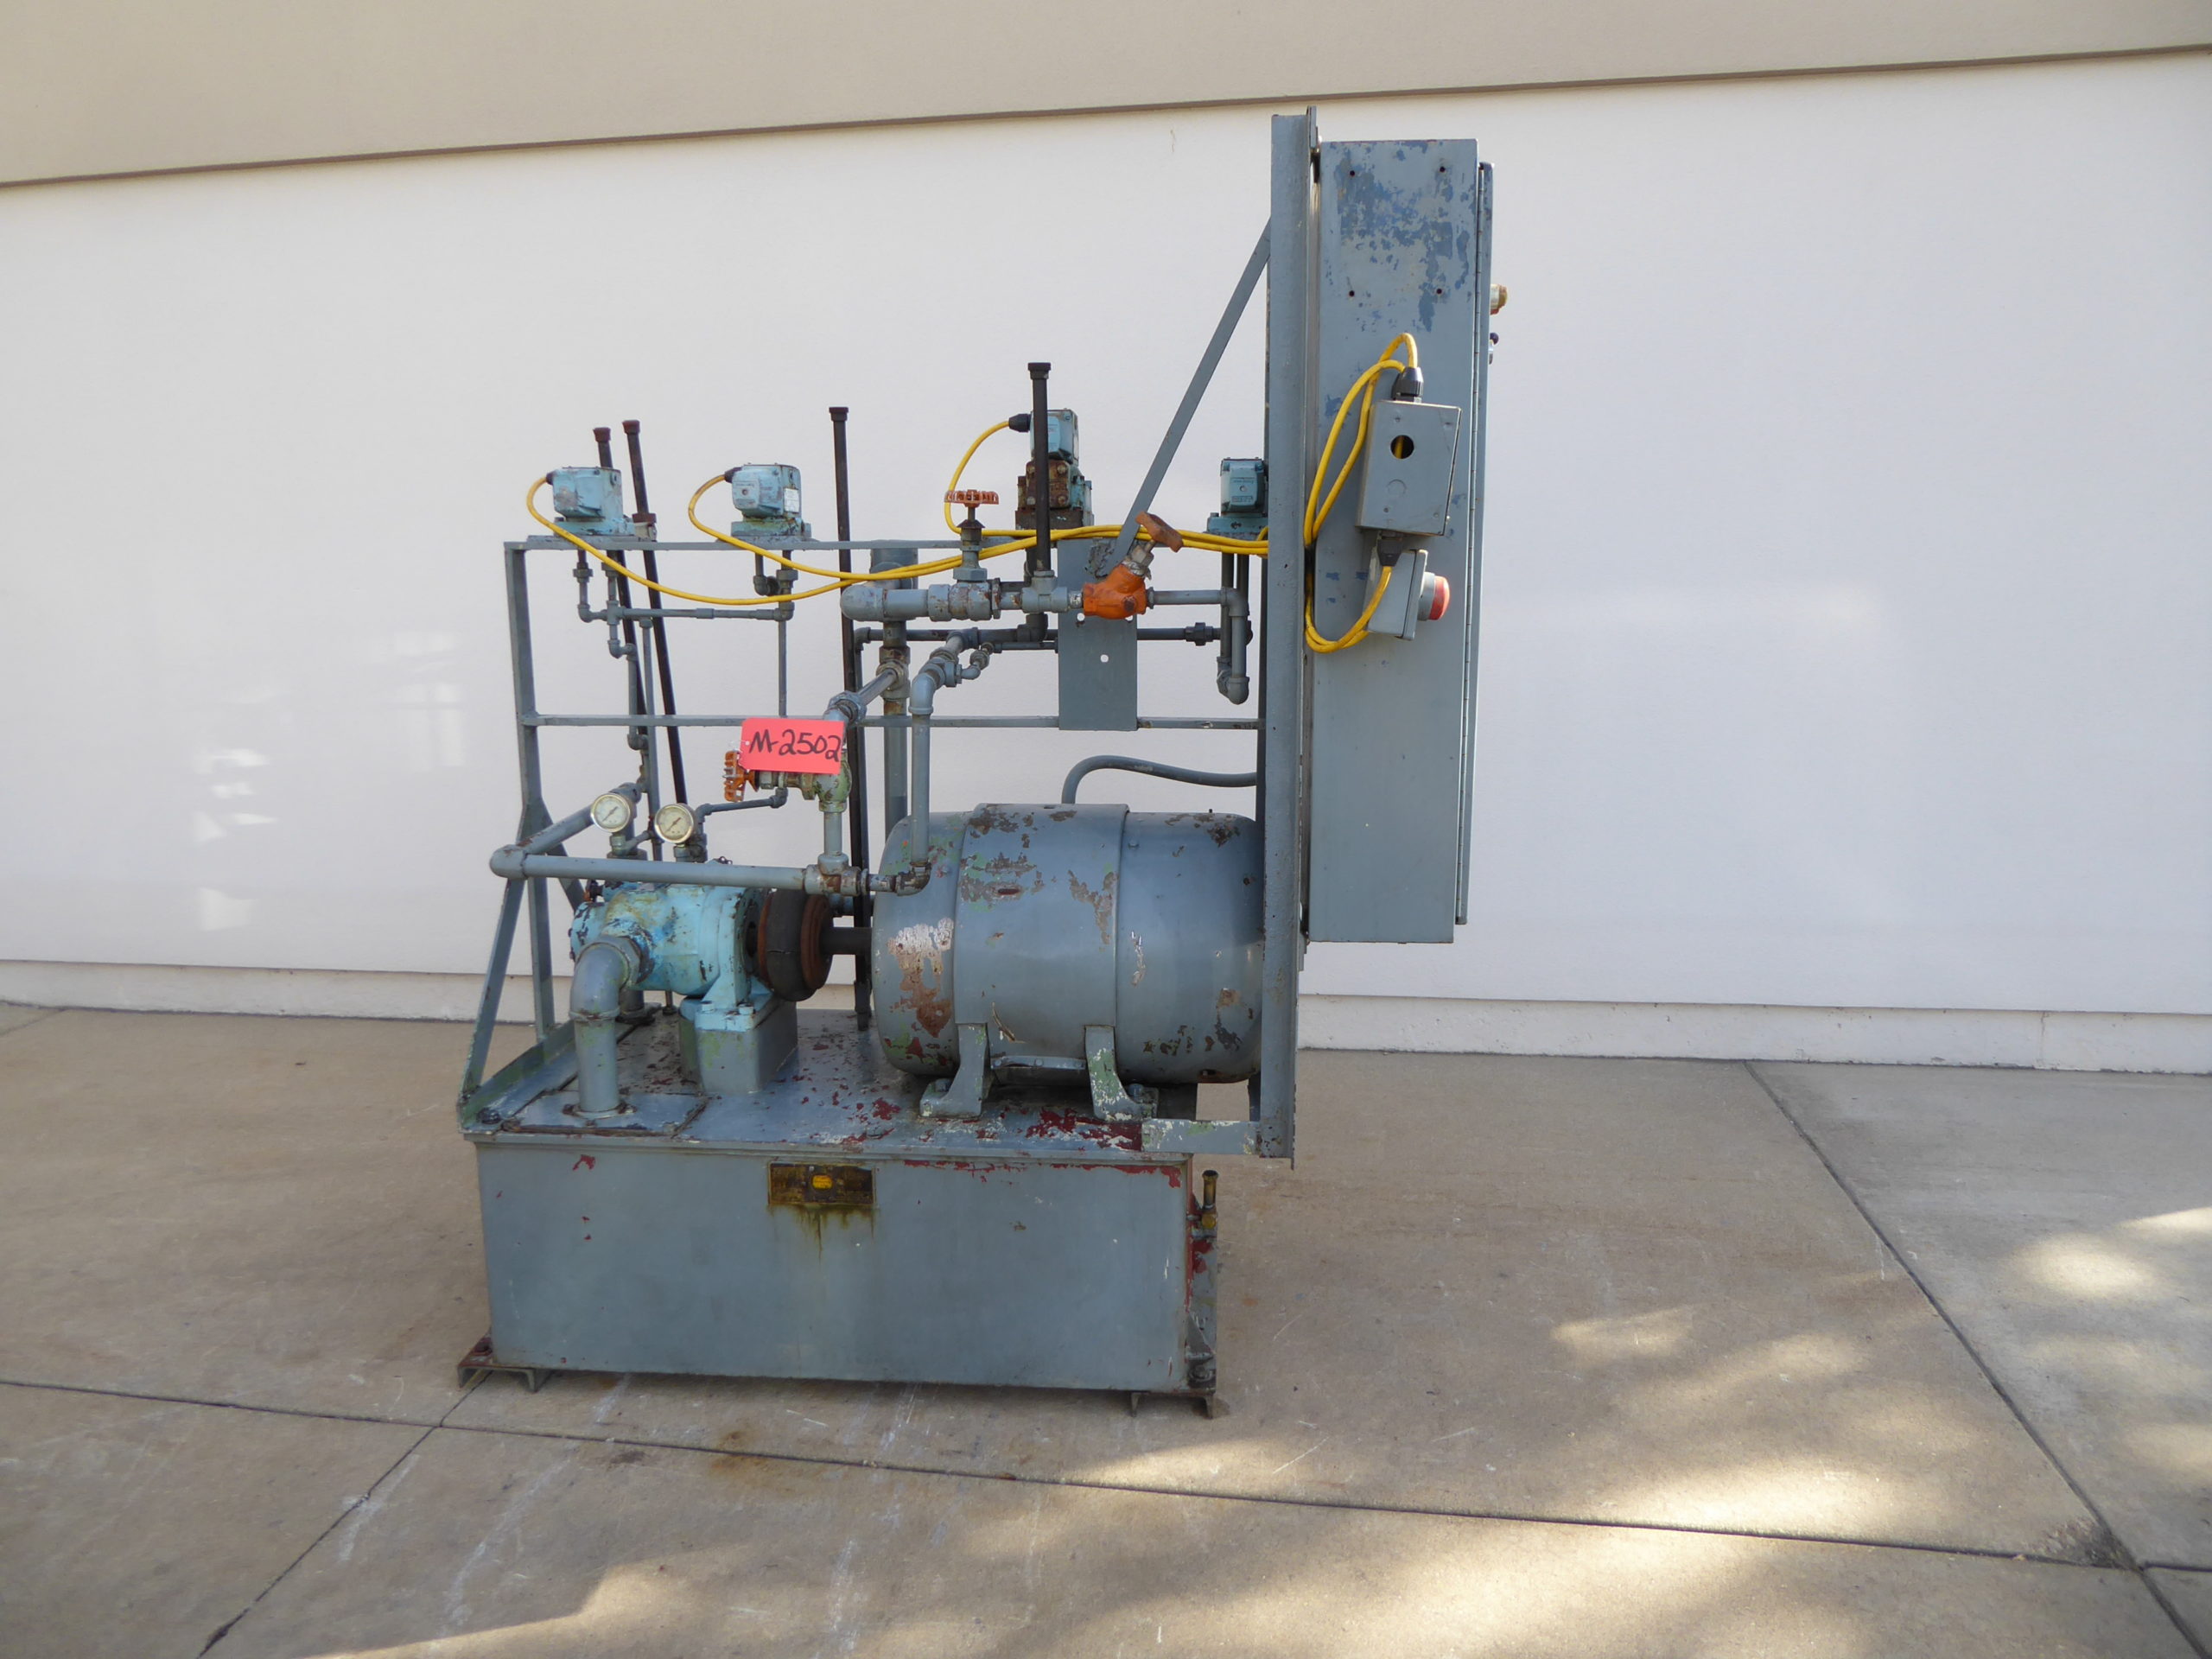 Used - Sperry-Vickers Combination Pump & Valves M2502-Misc. Equipment